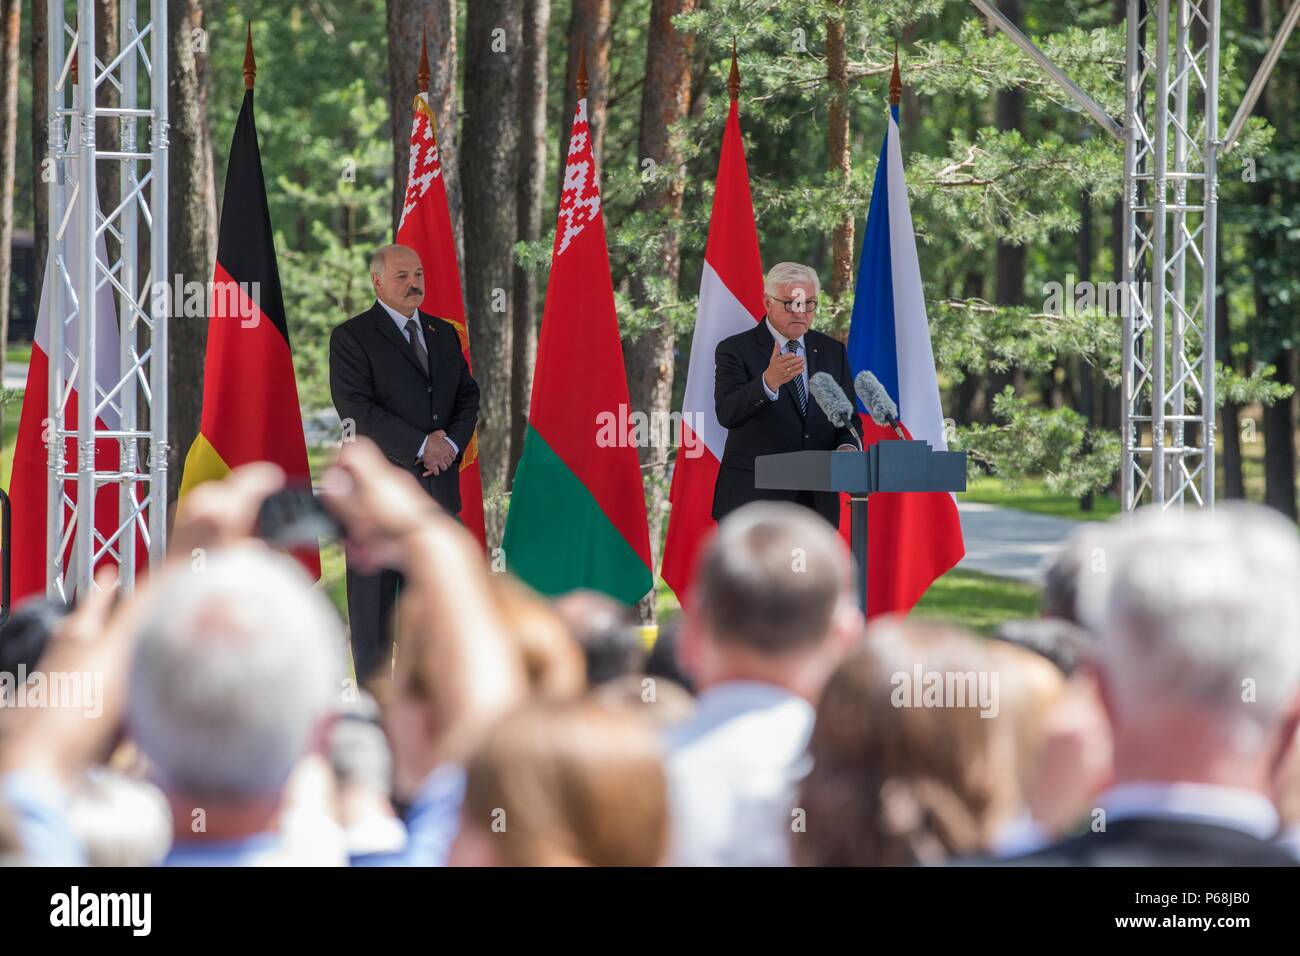 Minsk, Germany. 29th June, 2018. German President Frank-Walter Steinmeier (R) of the Social Democratic Party (SPD), and President of Belarus Alexandr Lukaschenko, speaking during the inauguration of the memorial site Malyj Trostenez. Malyj Trostenez was the largest National Socialist extermination camp on the grounds of the former Sovier Union. However, like many other areas on the former Soviet Union, it is not well-known in Germany and Europe. Credit: Jörg Carstensen/dpa/Alamy Live News Stock Photo